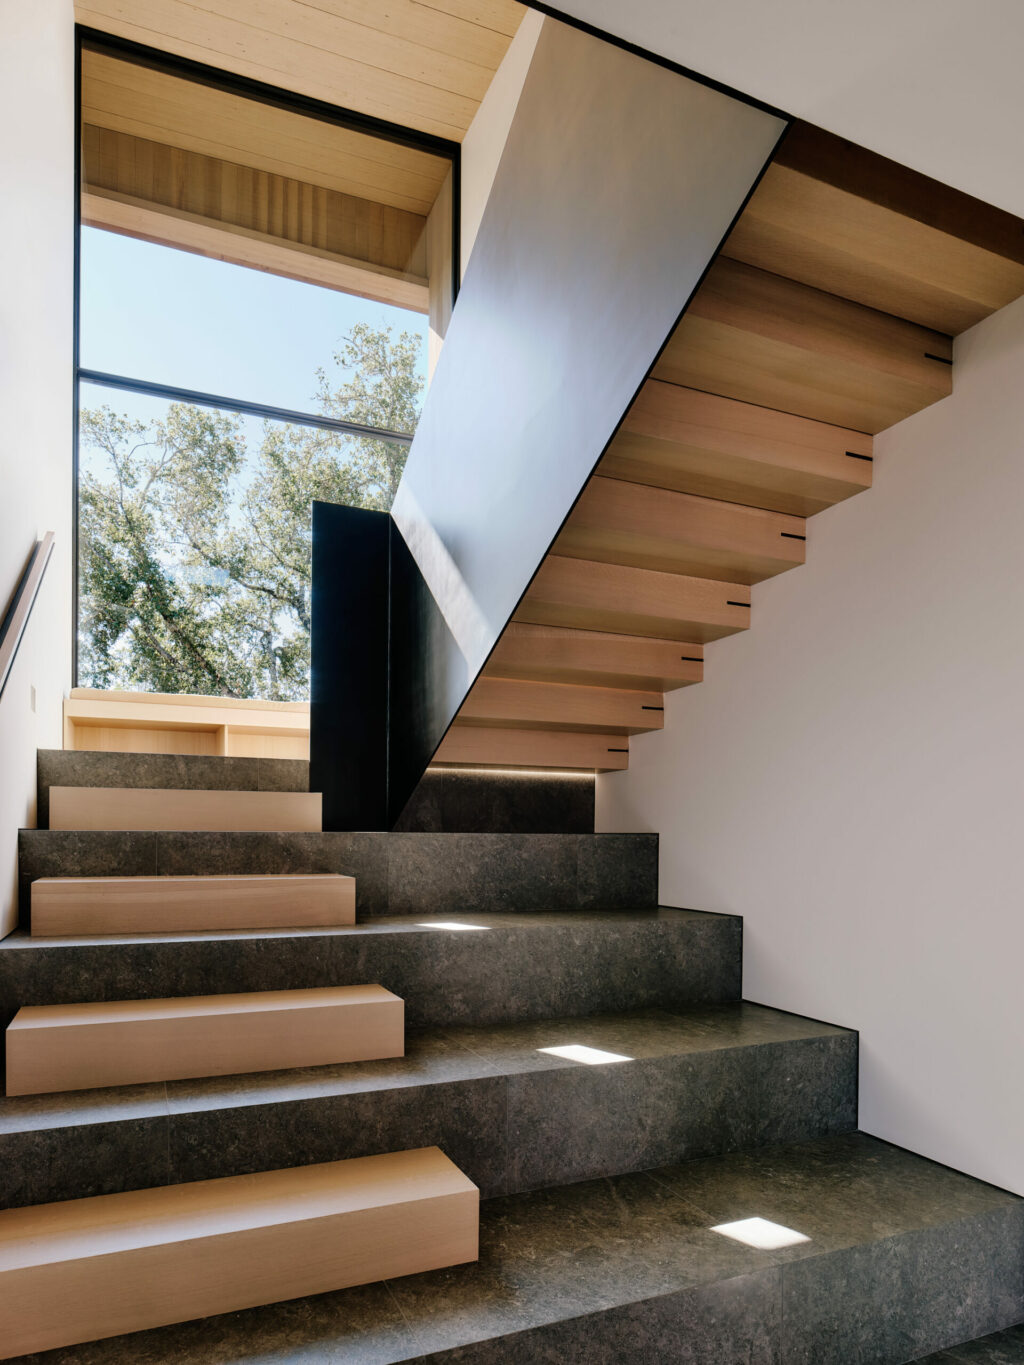 Staircase with interplay of wood and stone elements.  (Joe Fletcher)